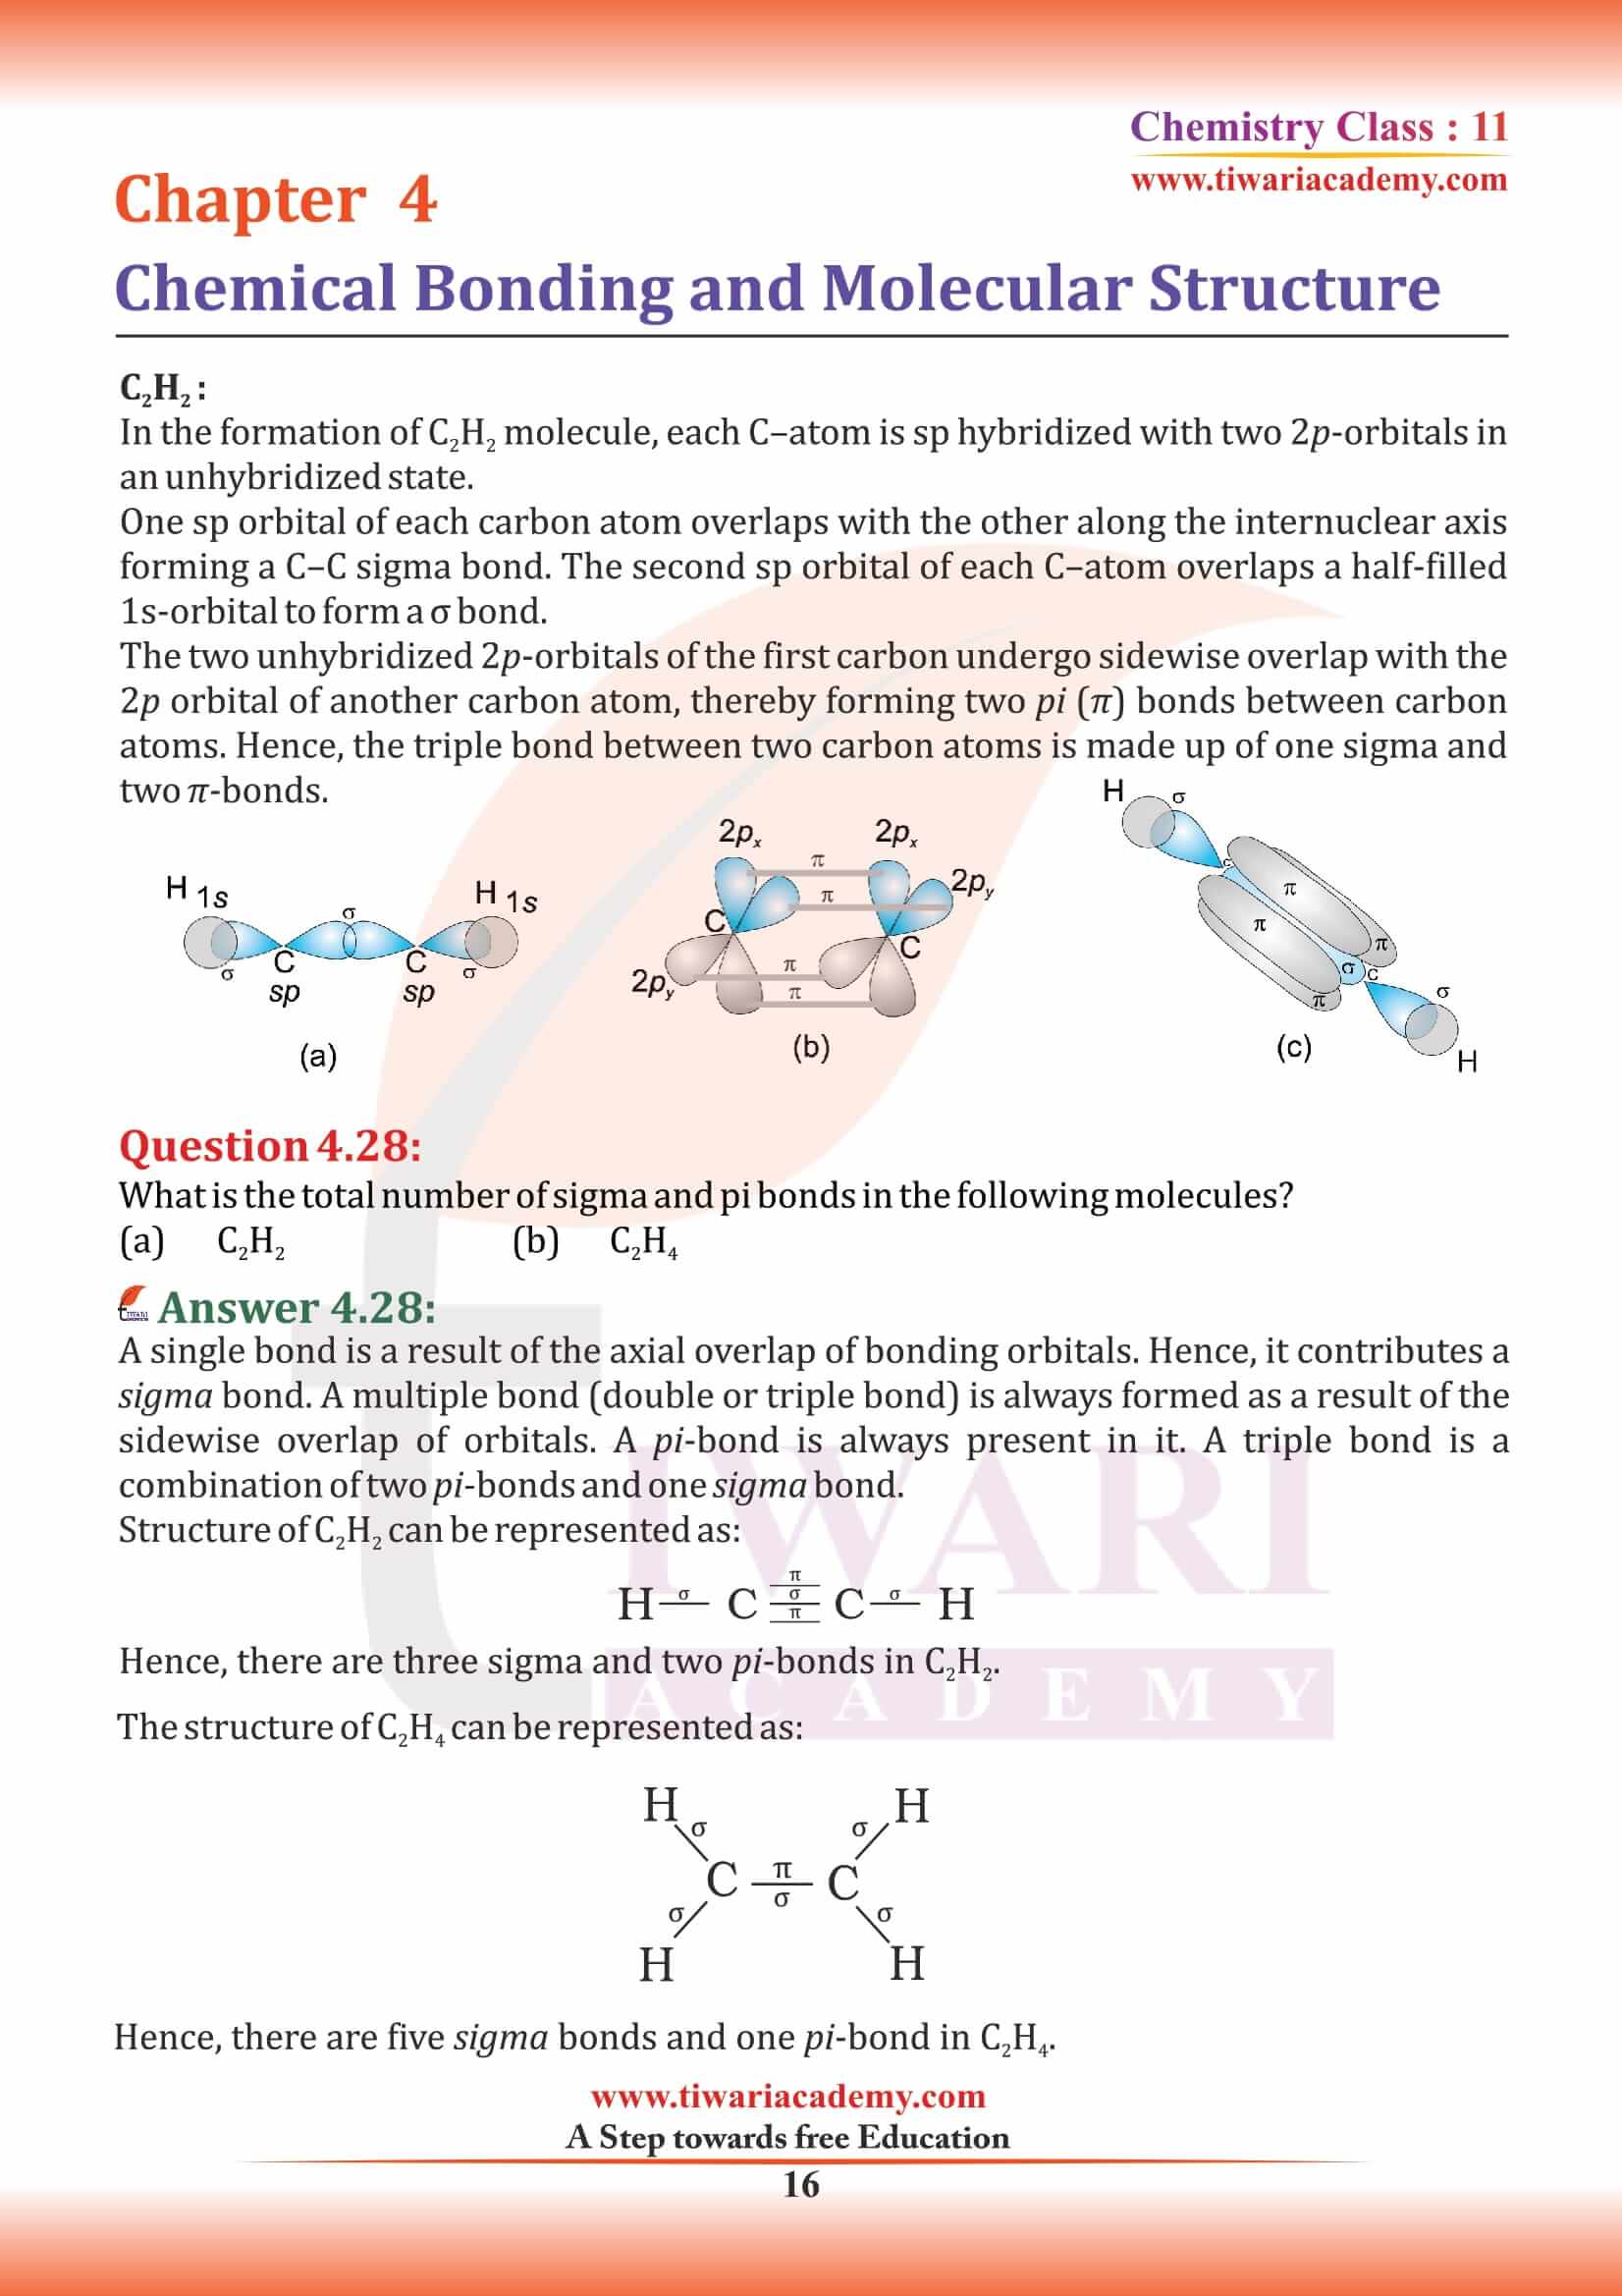 Class 11 Chemistry Chapter 4 exercises question answers